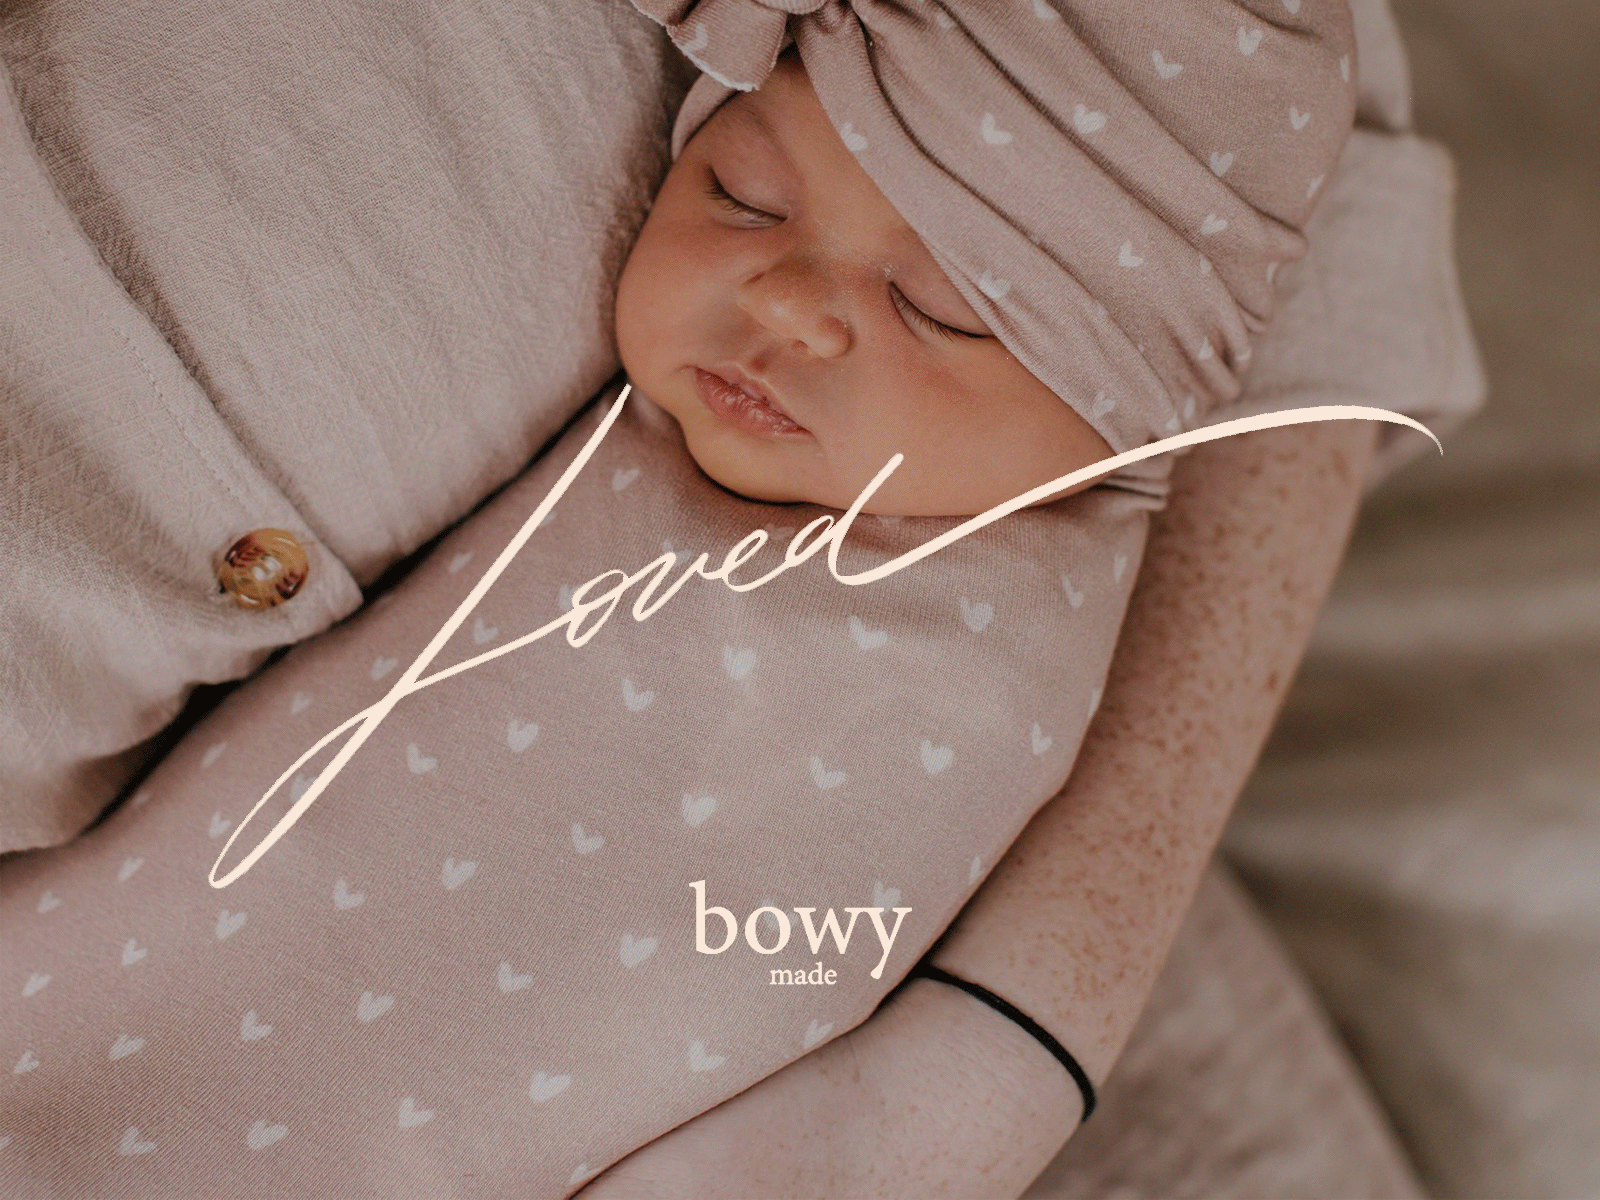 Loved / Luxe / Snug art artdirection bowy bowymade branding calligraphy clothing custom flow illustration kids lettering logo luxe luxurious script snug type